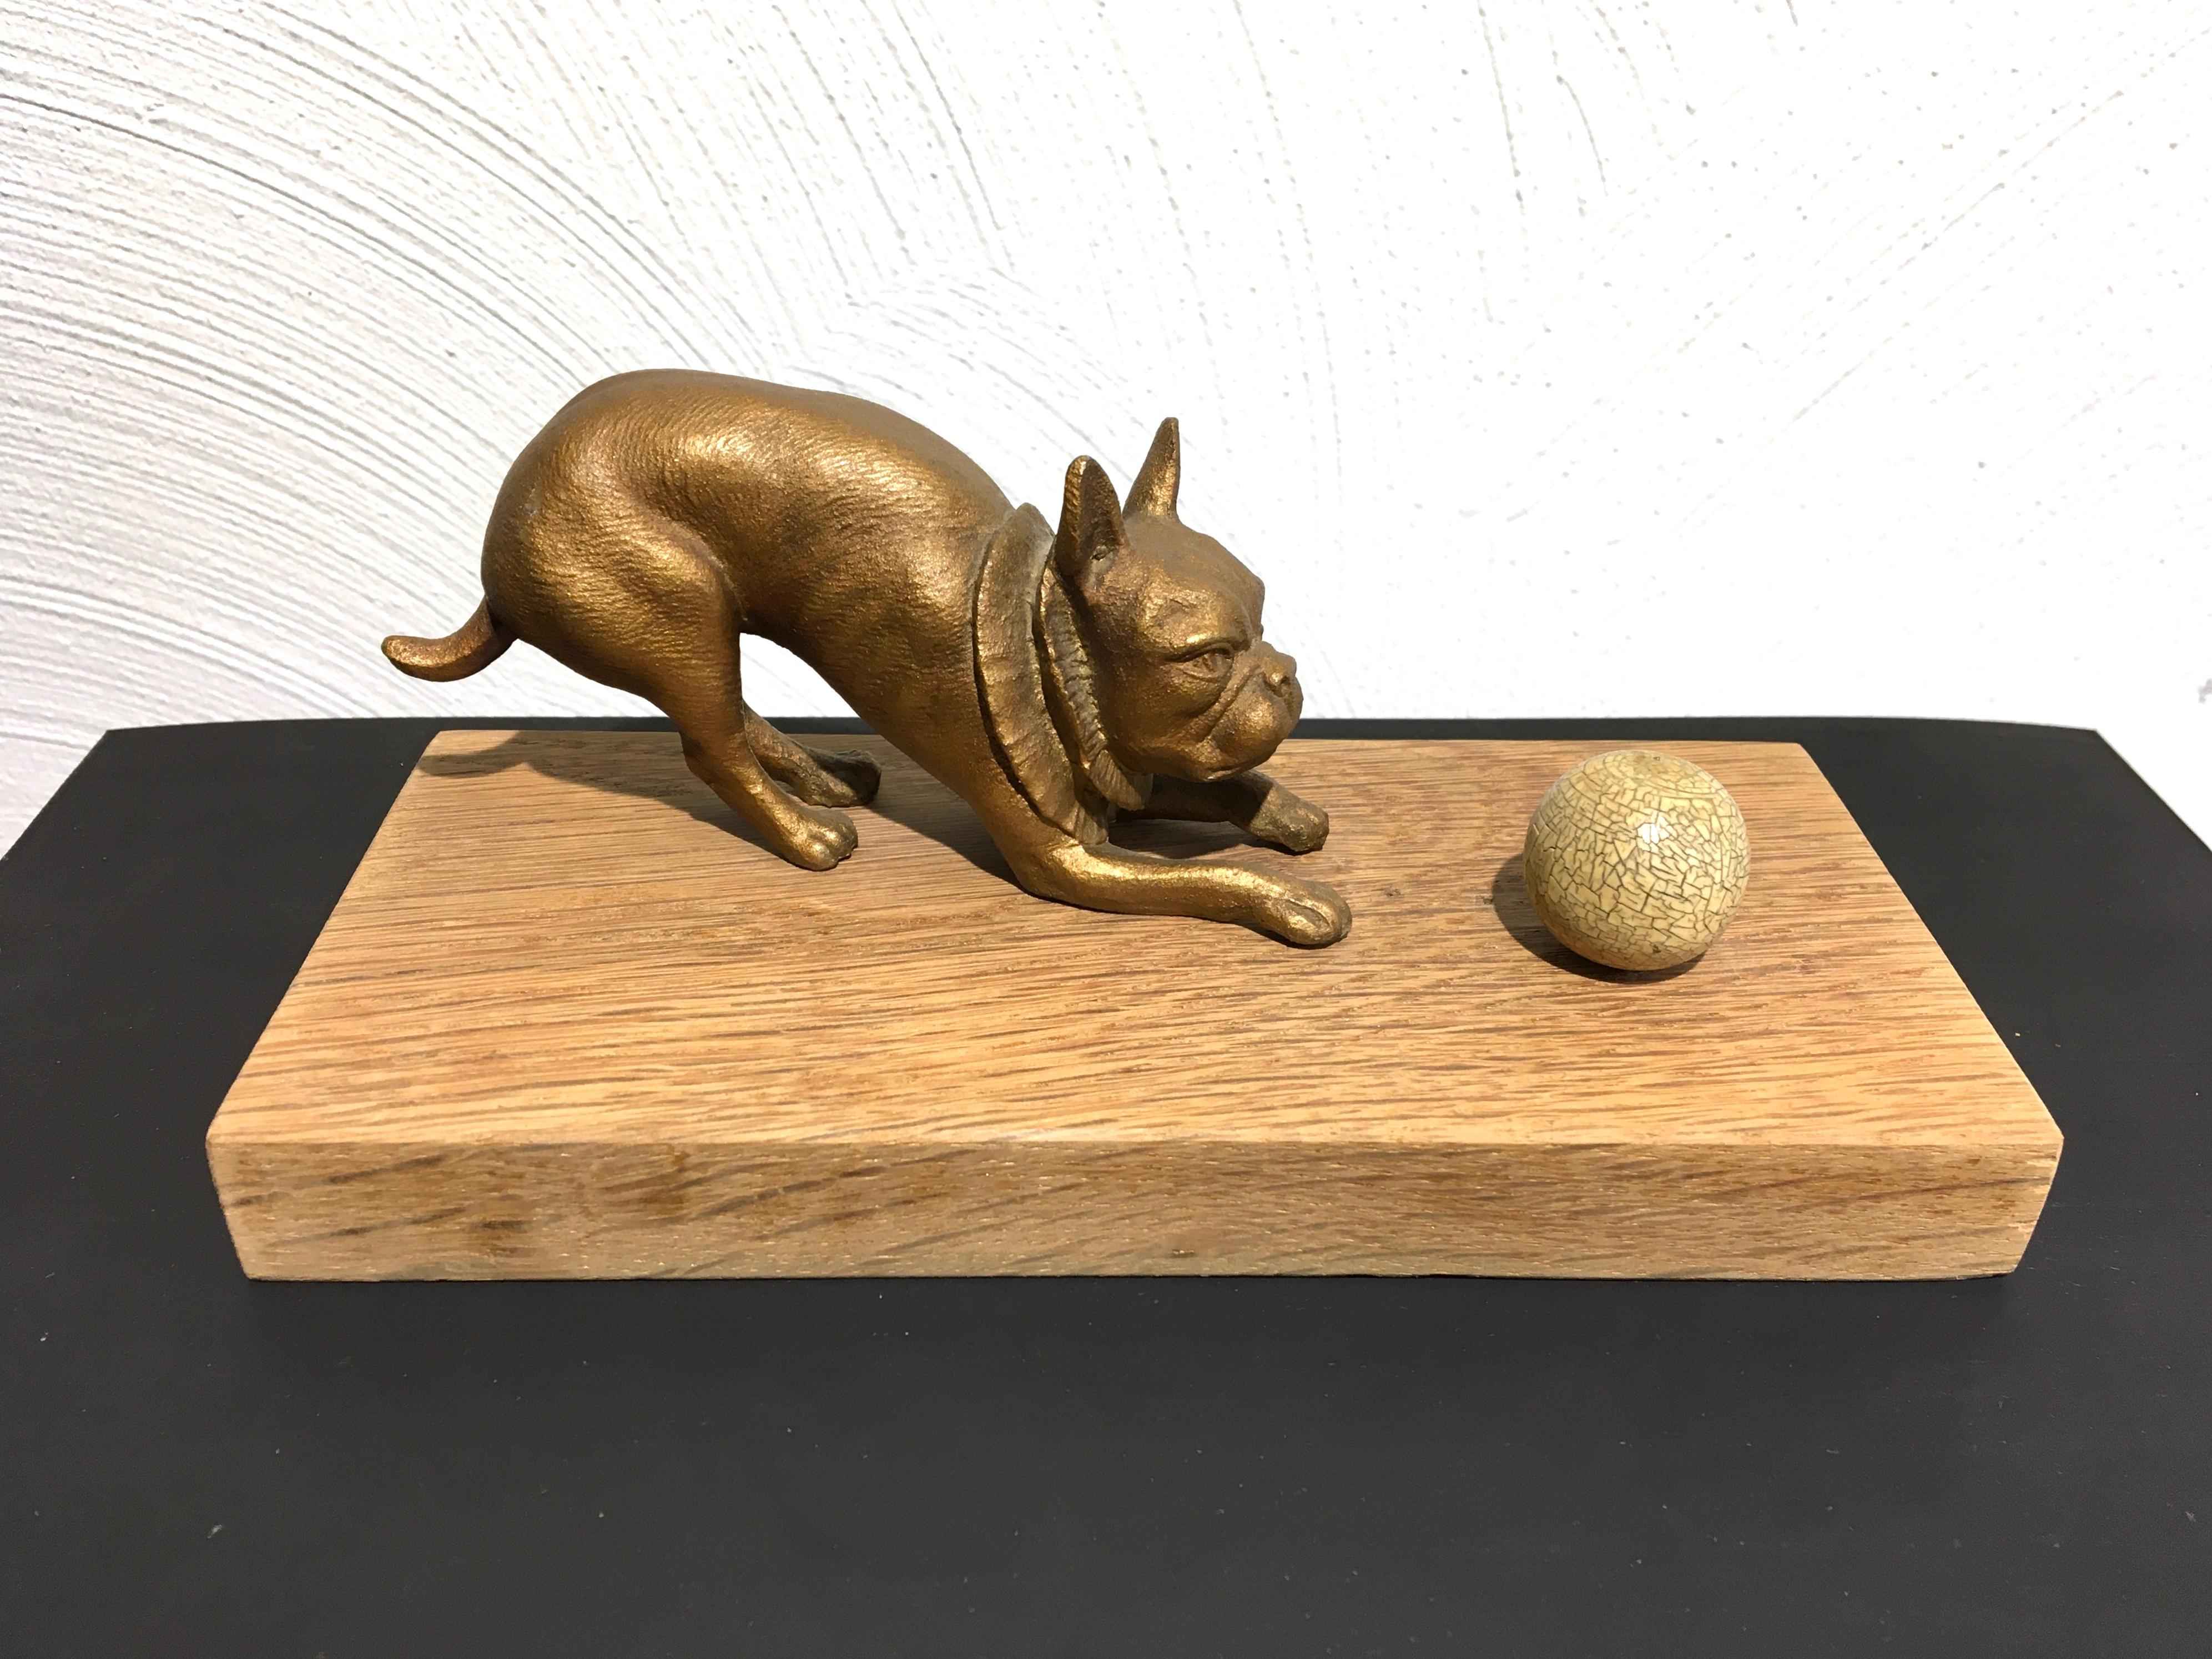 French bulldog playing with ball sculpture. 
A gold painted metal bulldog sculpture with ball mounted on a wooden base. 
The bulldog sculpture is very detailled , look at his head, eyes, nose, paws and beautiful collar around his neck.  In the